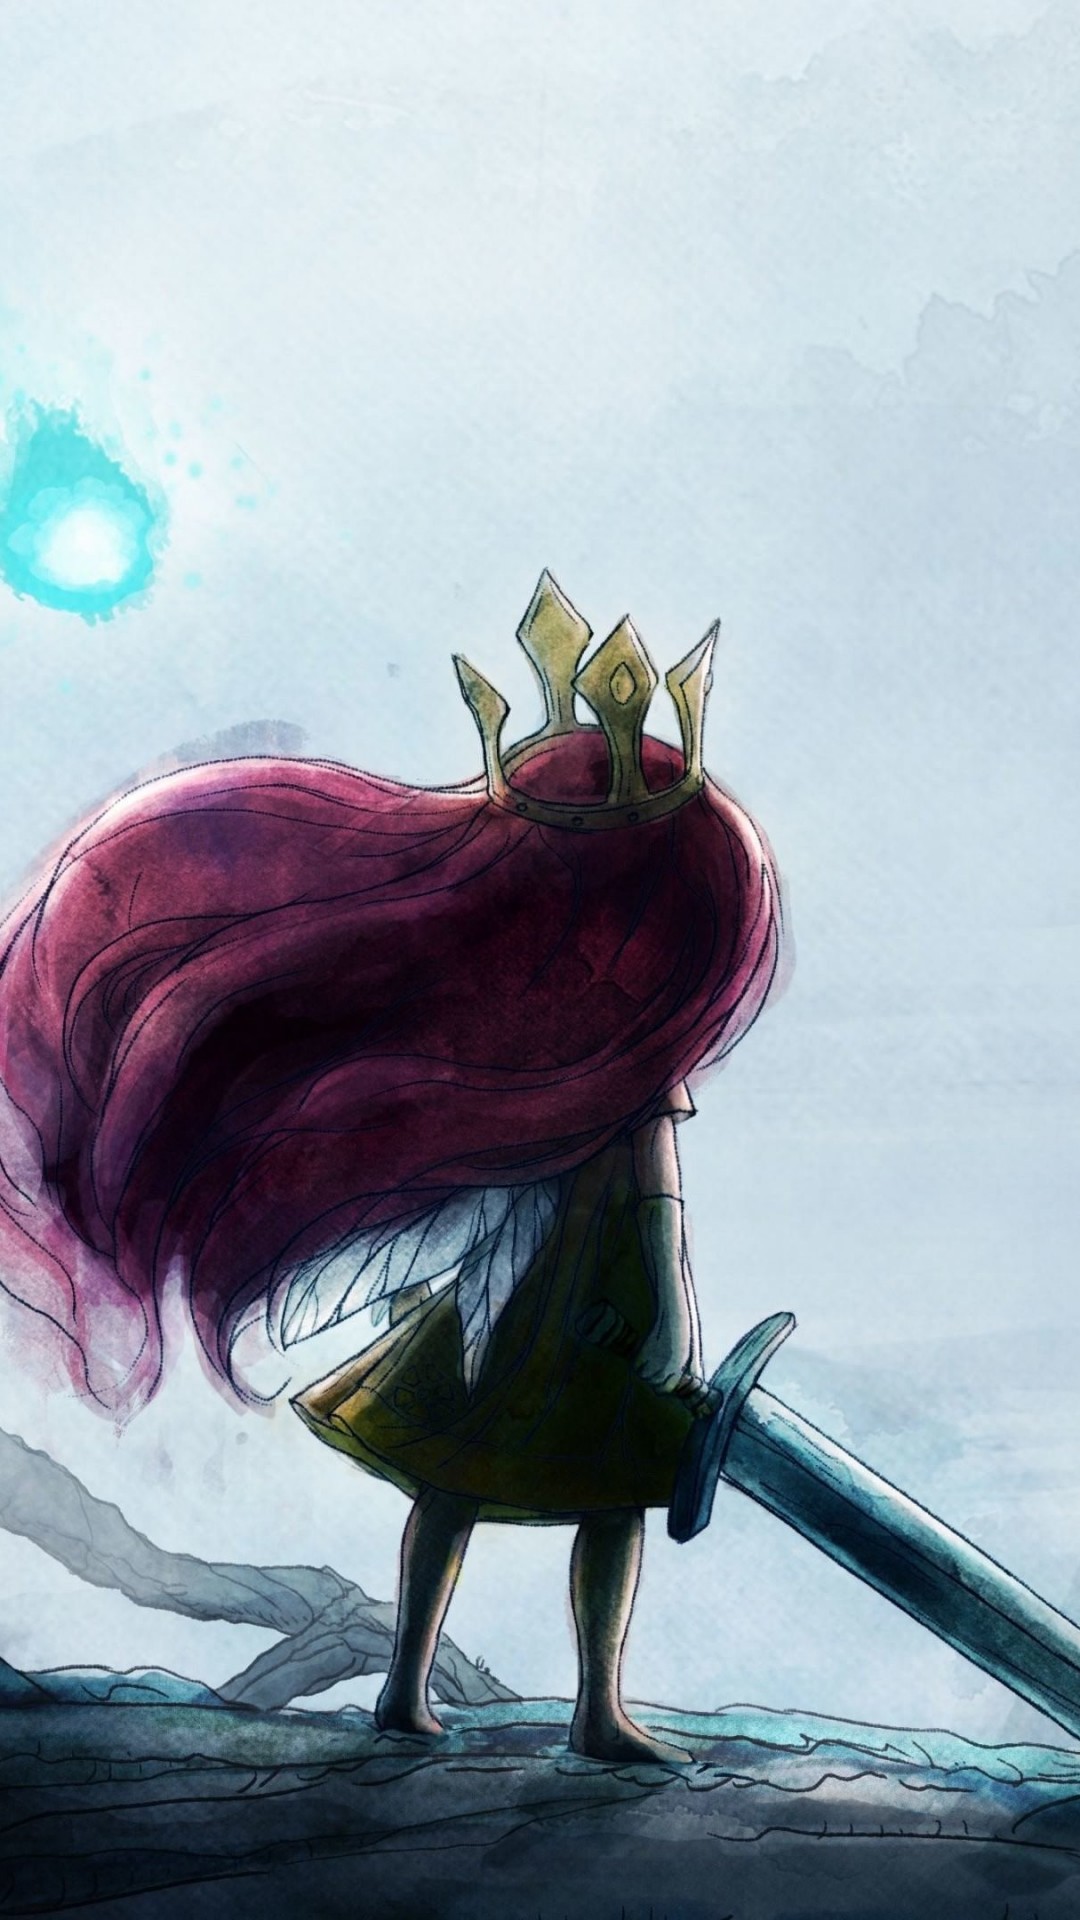 Child Of Light Wallpaper for SONY Xperia Z3